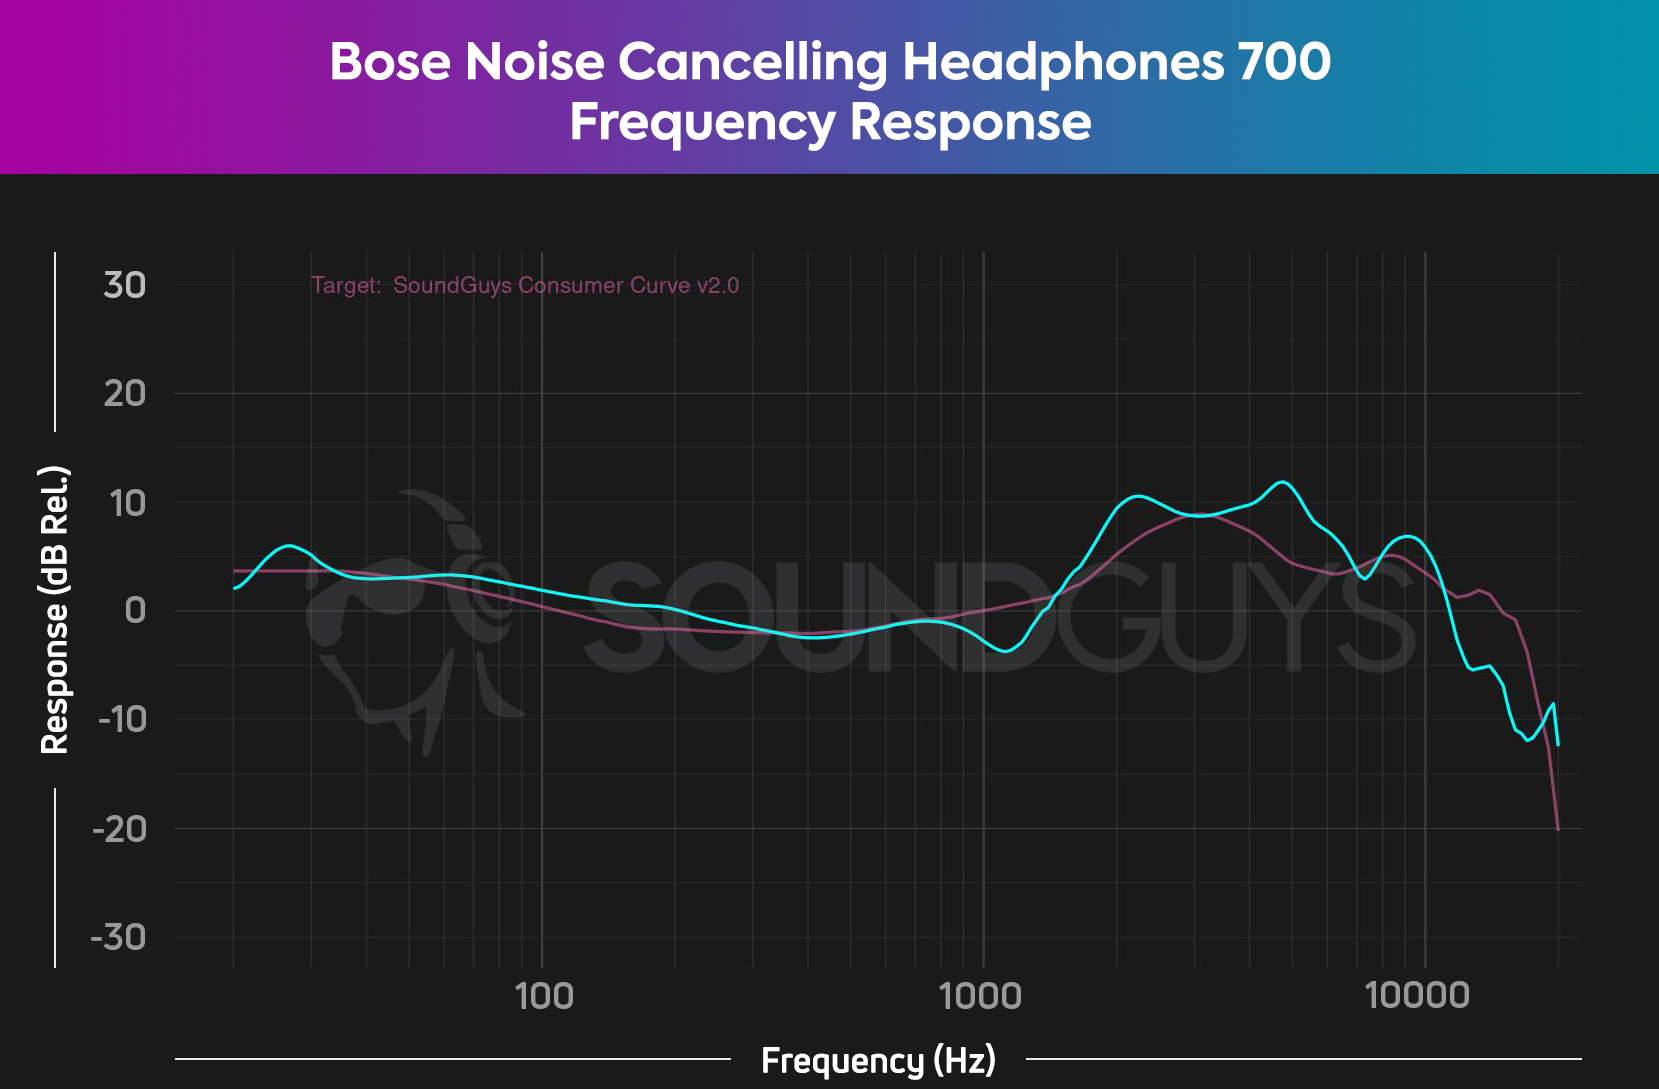 The frequency response chart for the Bose Noise Canceling Headphones 700 which follows our house curve, though some bass emphasis is apparent.